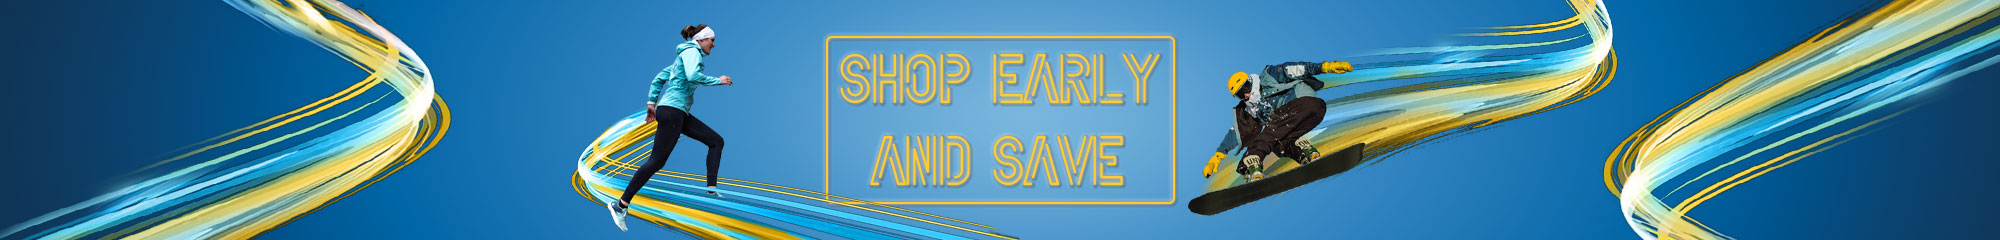 Shop Early and Save